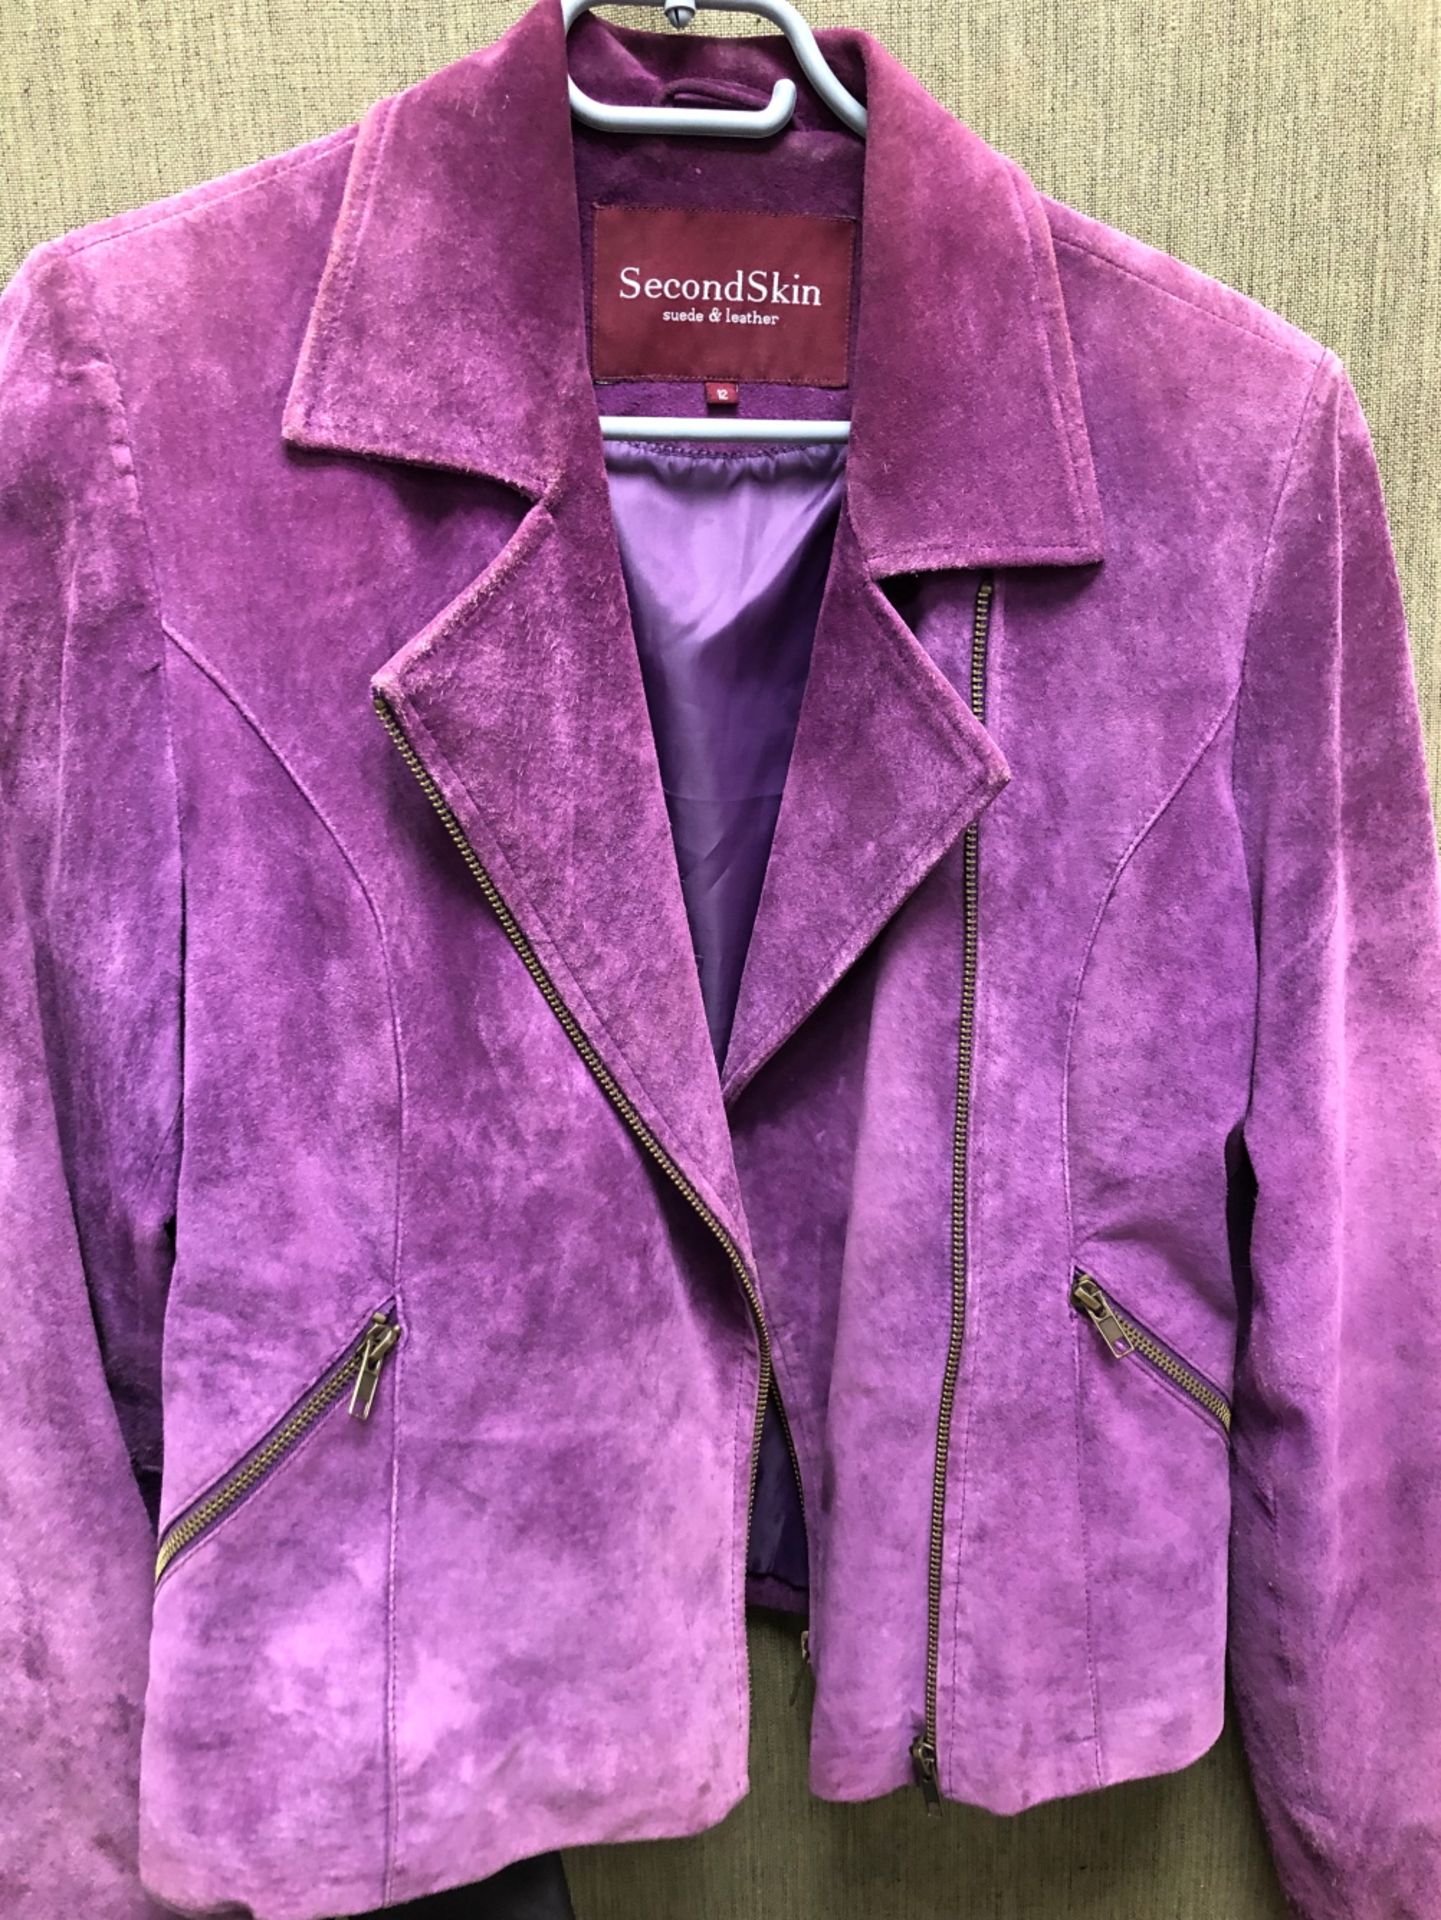 JACKETS. A SECOND SKIN PURPLE SUEDE JACKET SIZE 12, TOGETHER WITH A DARK BROWN COUNTRY CASUALS - Image 6 of 10